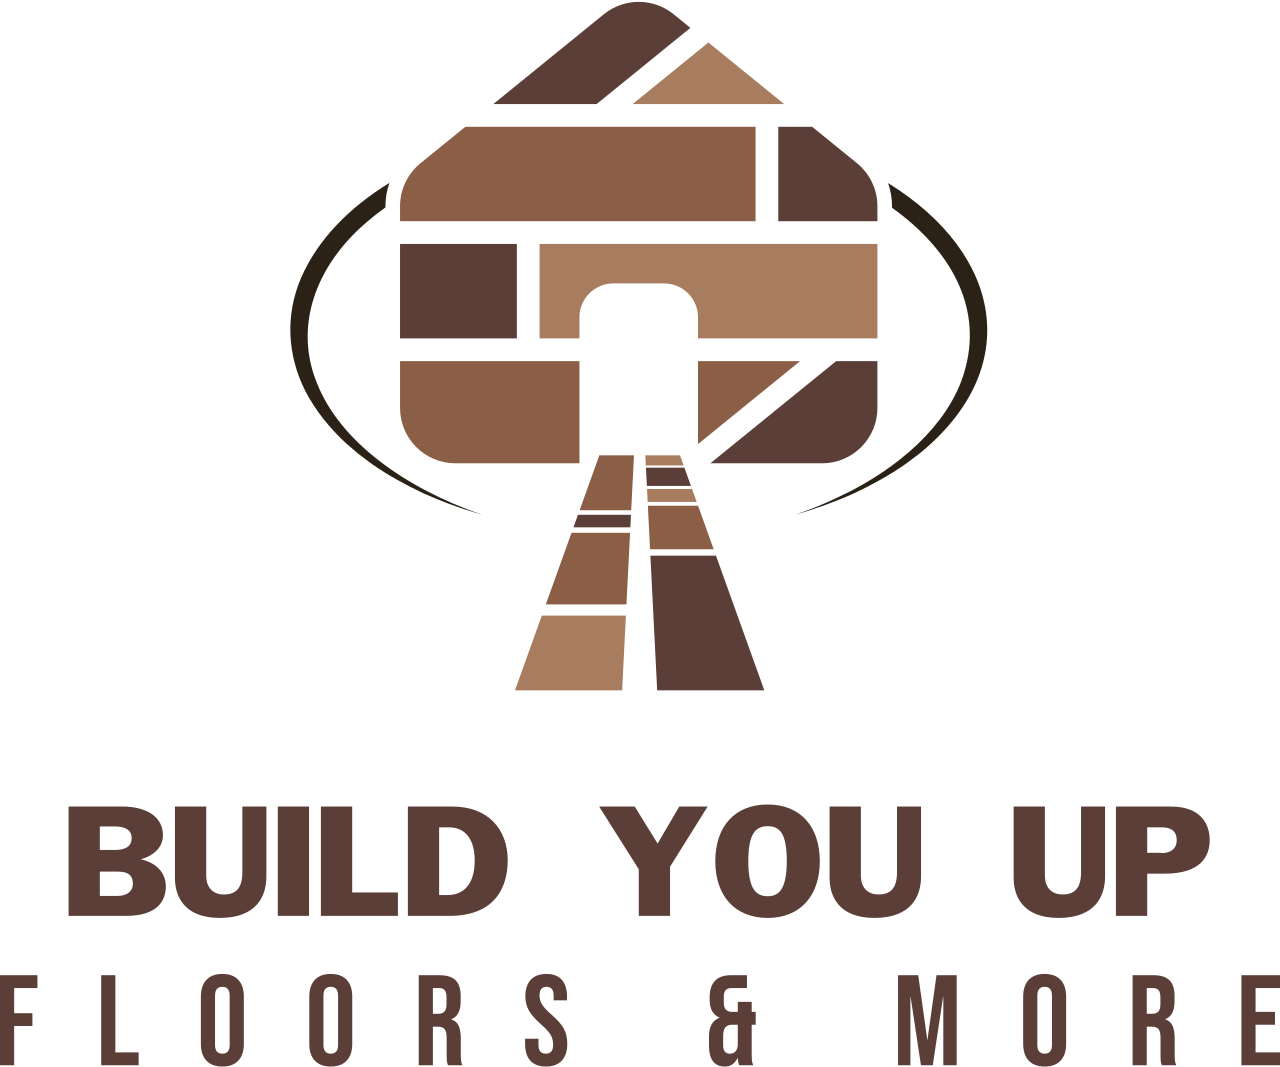 Build you Up's web page